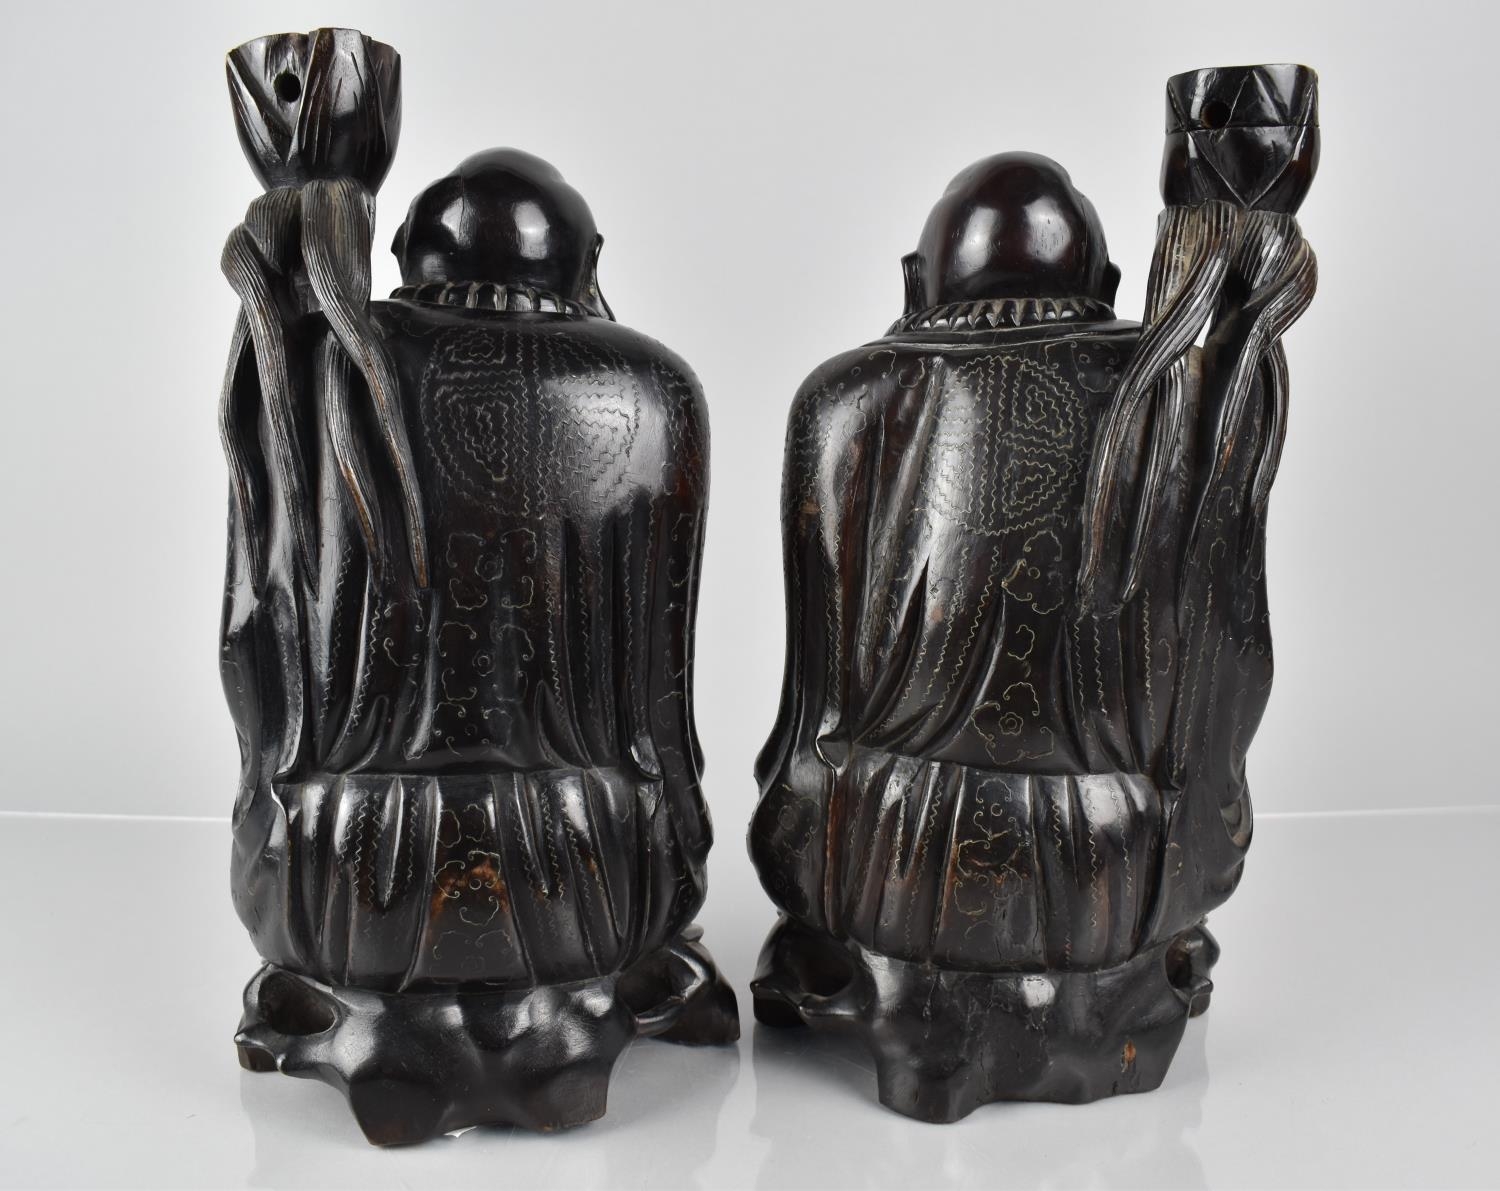 A Pair of Late 19th Century Chinese Hardwood Figural Candle Holders in the Form of Chinese Gods/ - Image 3 of 3